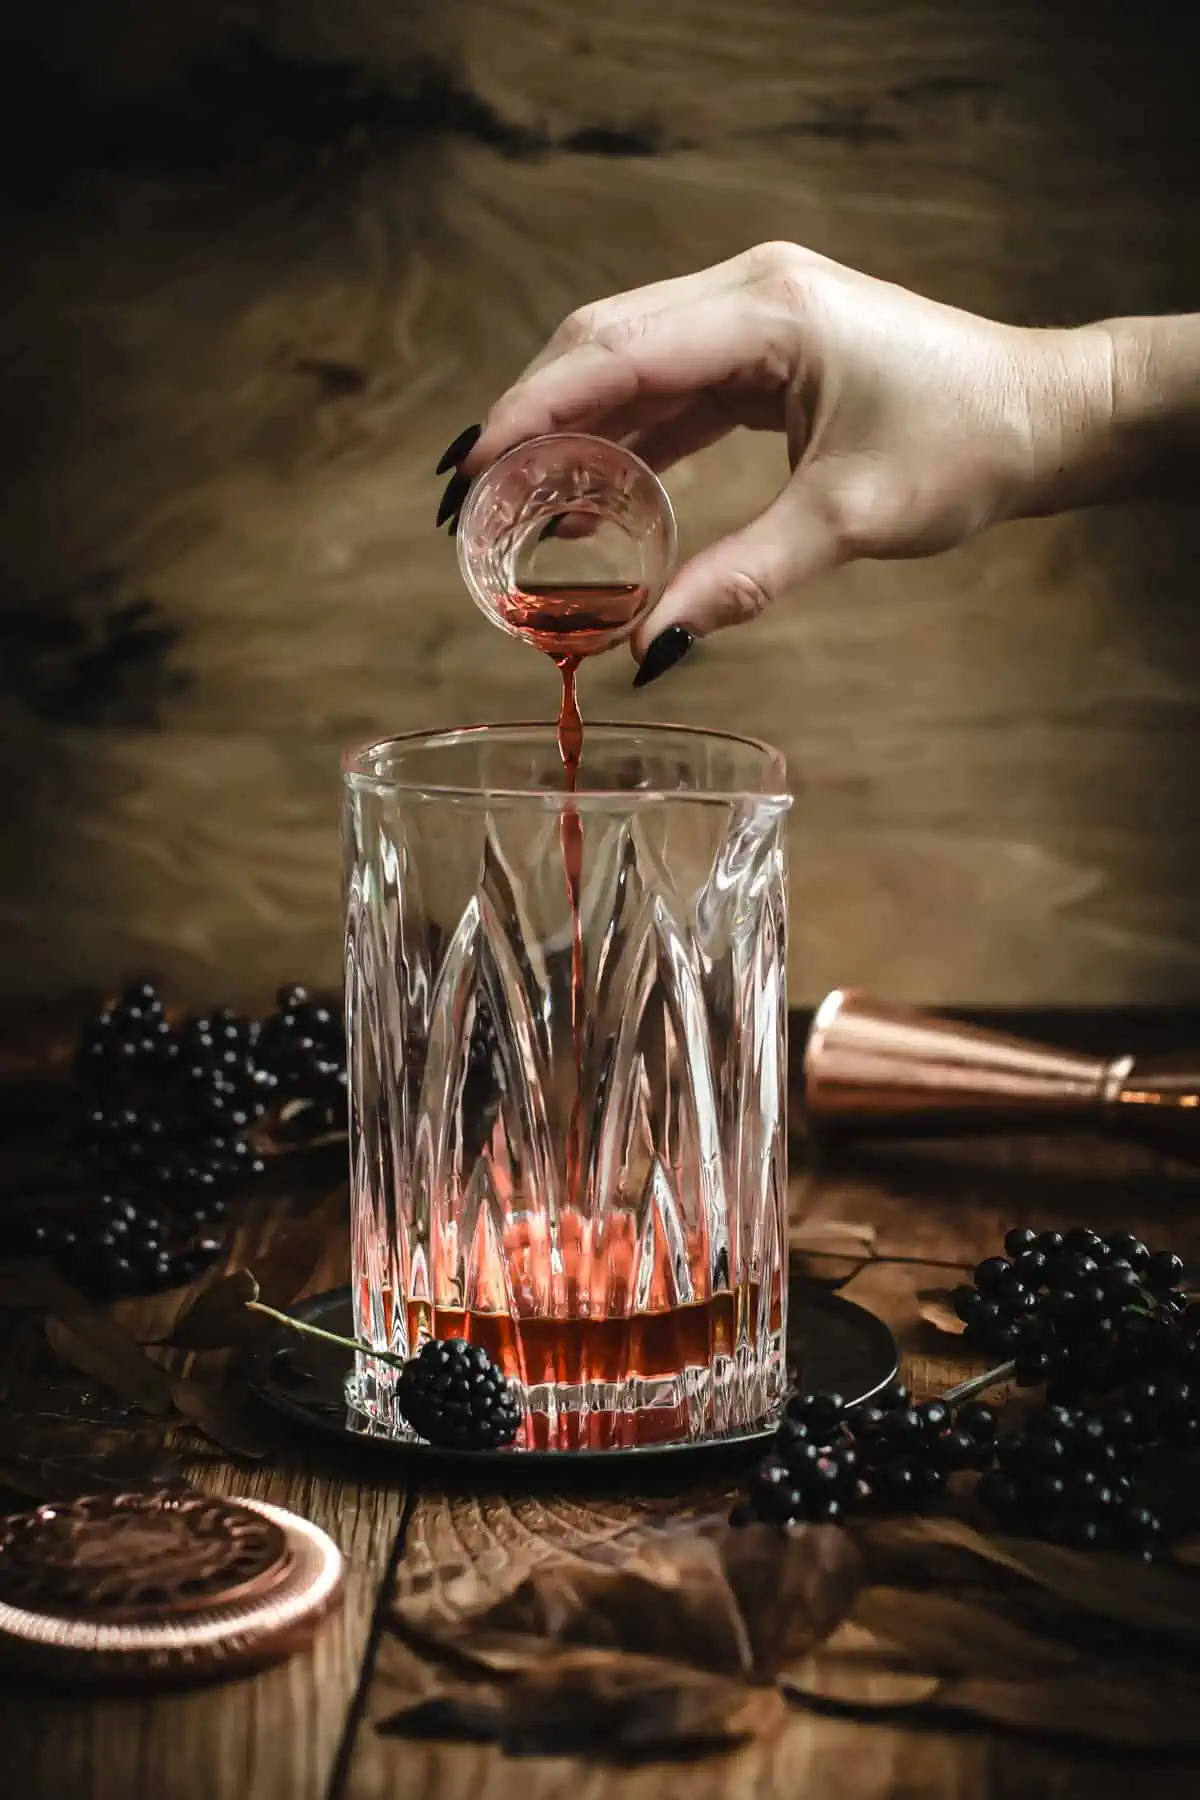 Add the ingredients for a Black Manhattan to a cocktail mixing glass.